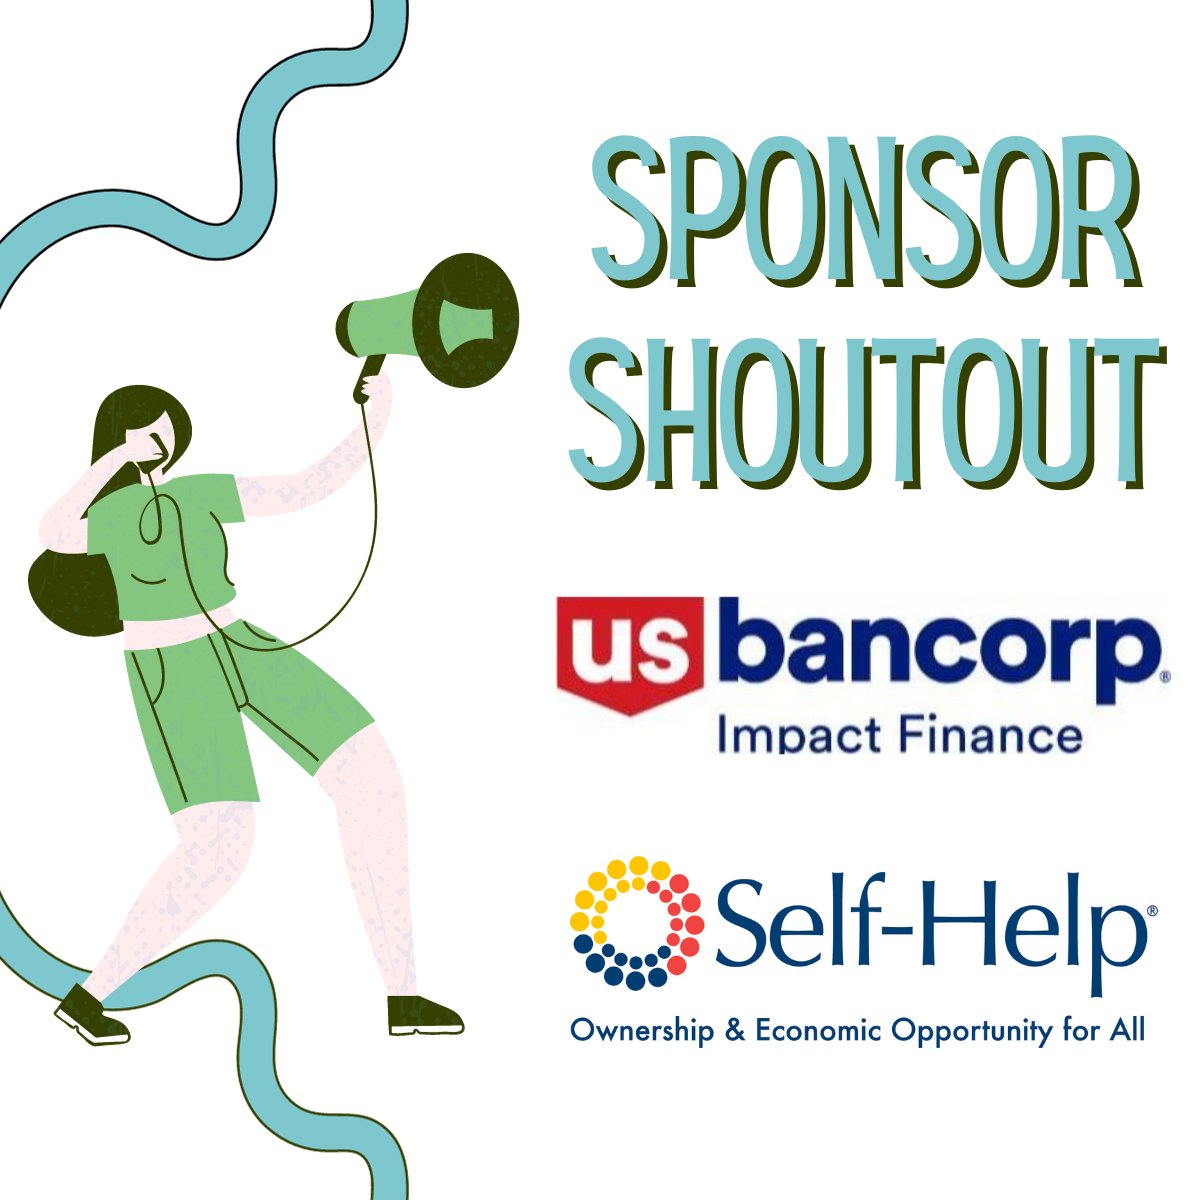 A special sponsor shoutout to the organizations making this podcast possible. US Bancorp Impact Finance and Self-Helf Federal Credit Union are working hard to align your investment dollars with social change. We are proud to be partnered with these #renegades!